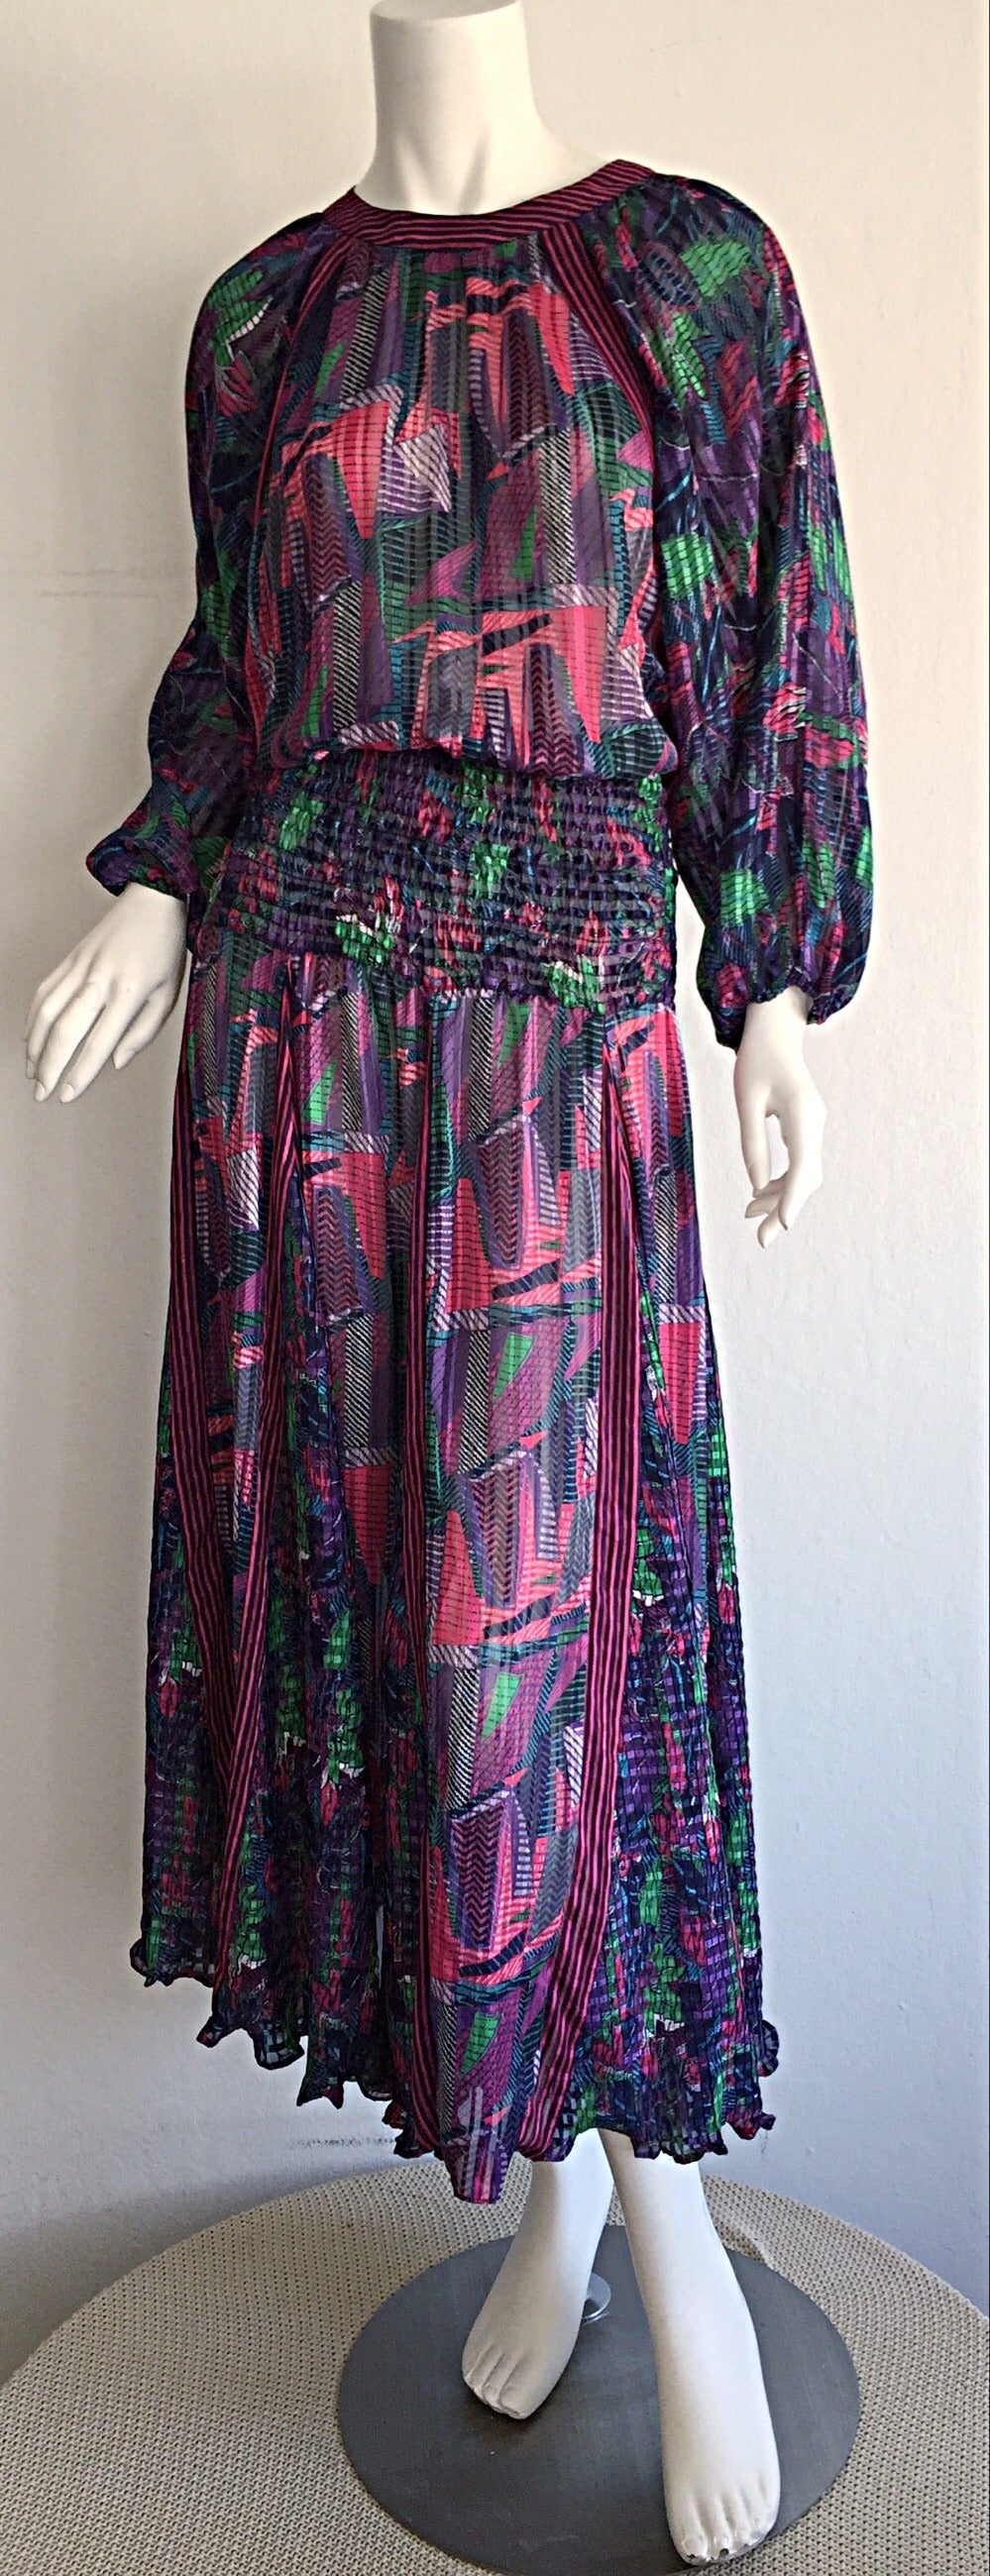 Wonderful vintage 1980s bohemian colorful dress! Beautiful abstract prints, mixed with stripes. Pleated  skirt features a variety of panels, that look incredible when worn. Chic flowy ballon sleeves. Button closure at back neck. Perfect from day to